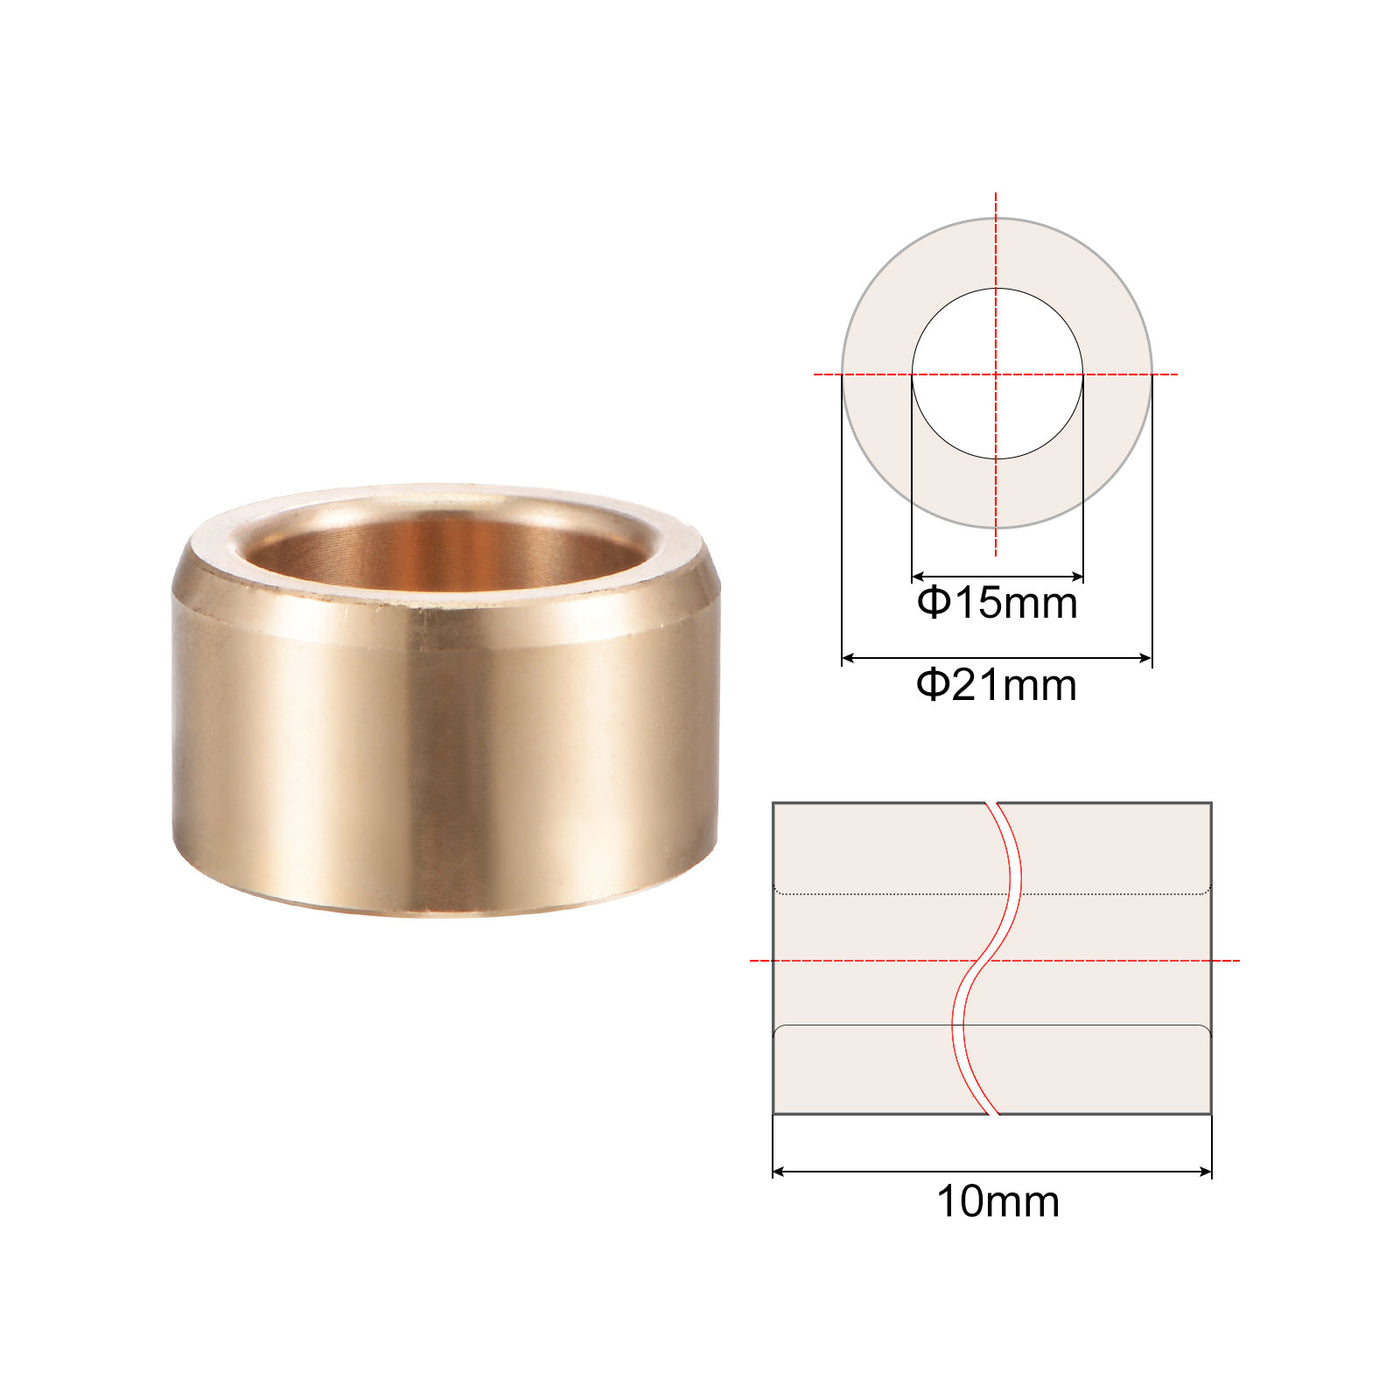 uxcell Uxcell Sleeve Bearings Cast Brass Self-Lubricating Bushing